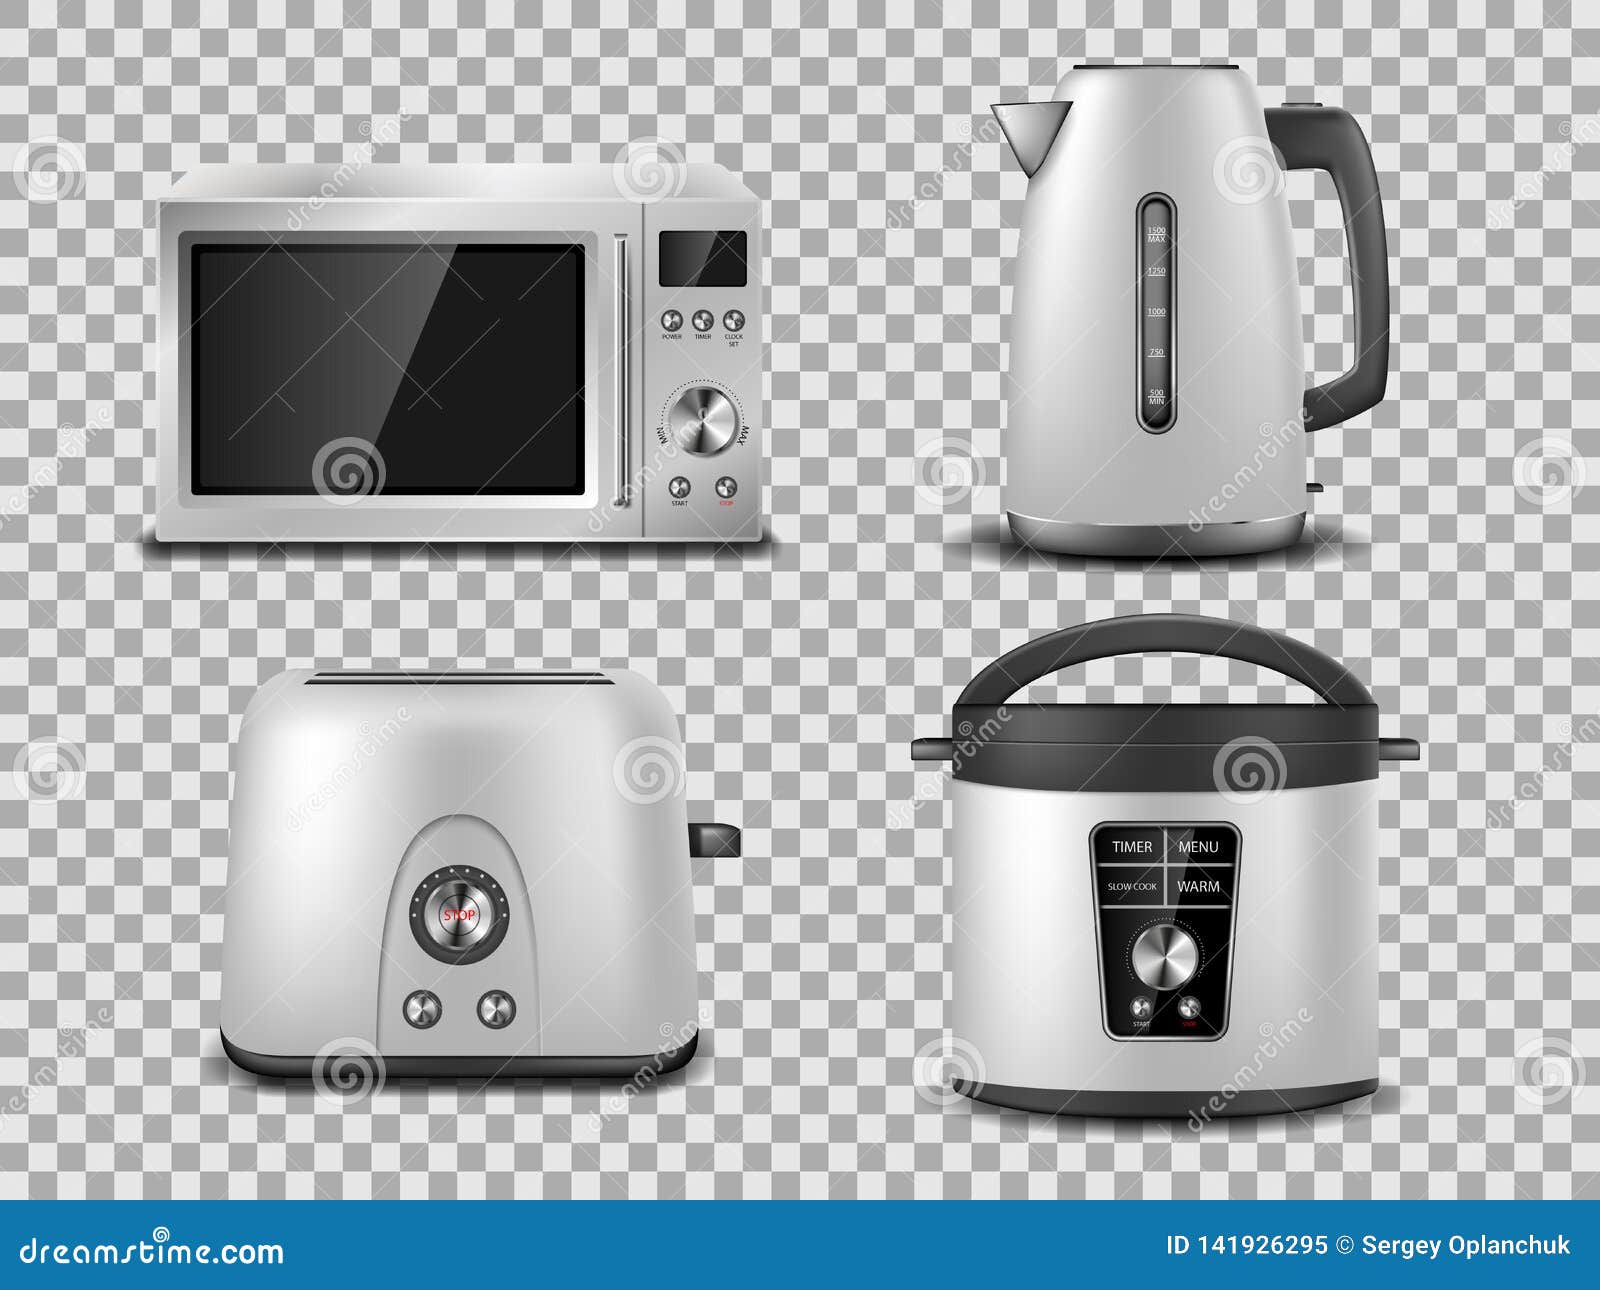 Household appliances kitchen homeappliance Vector Image